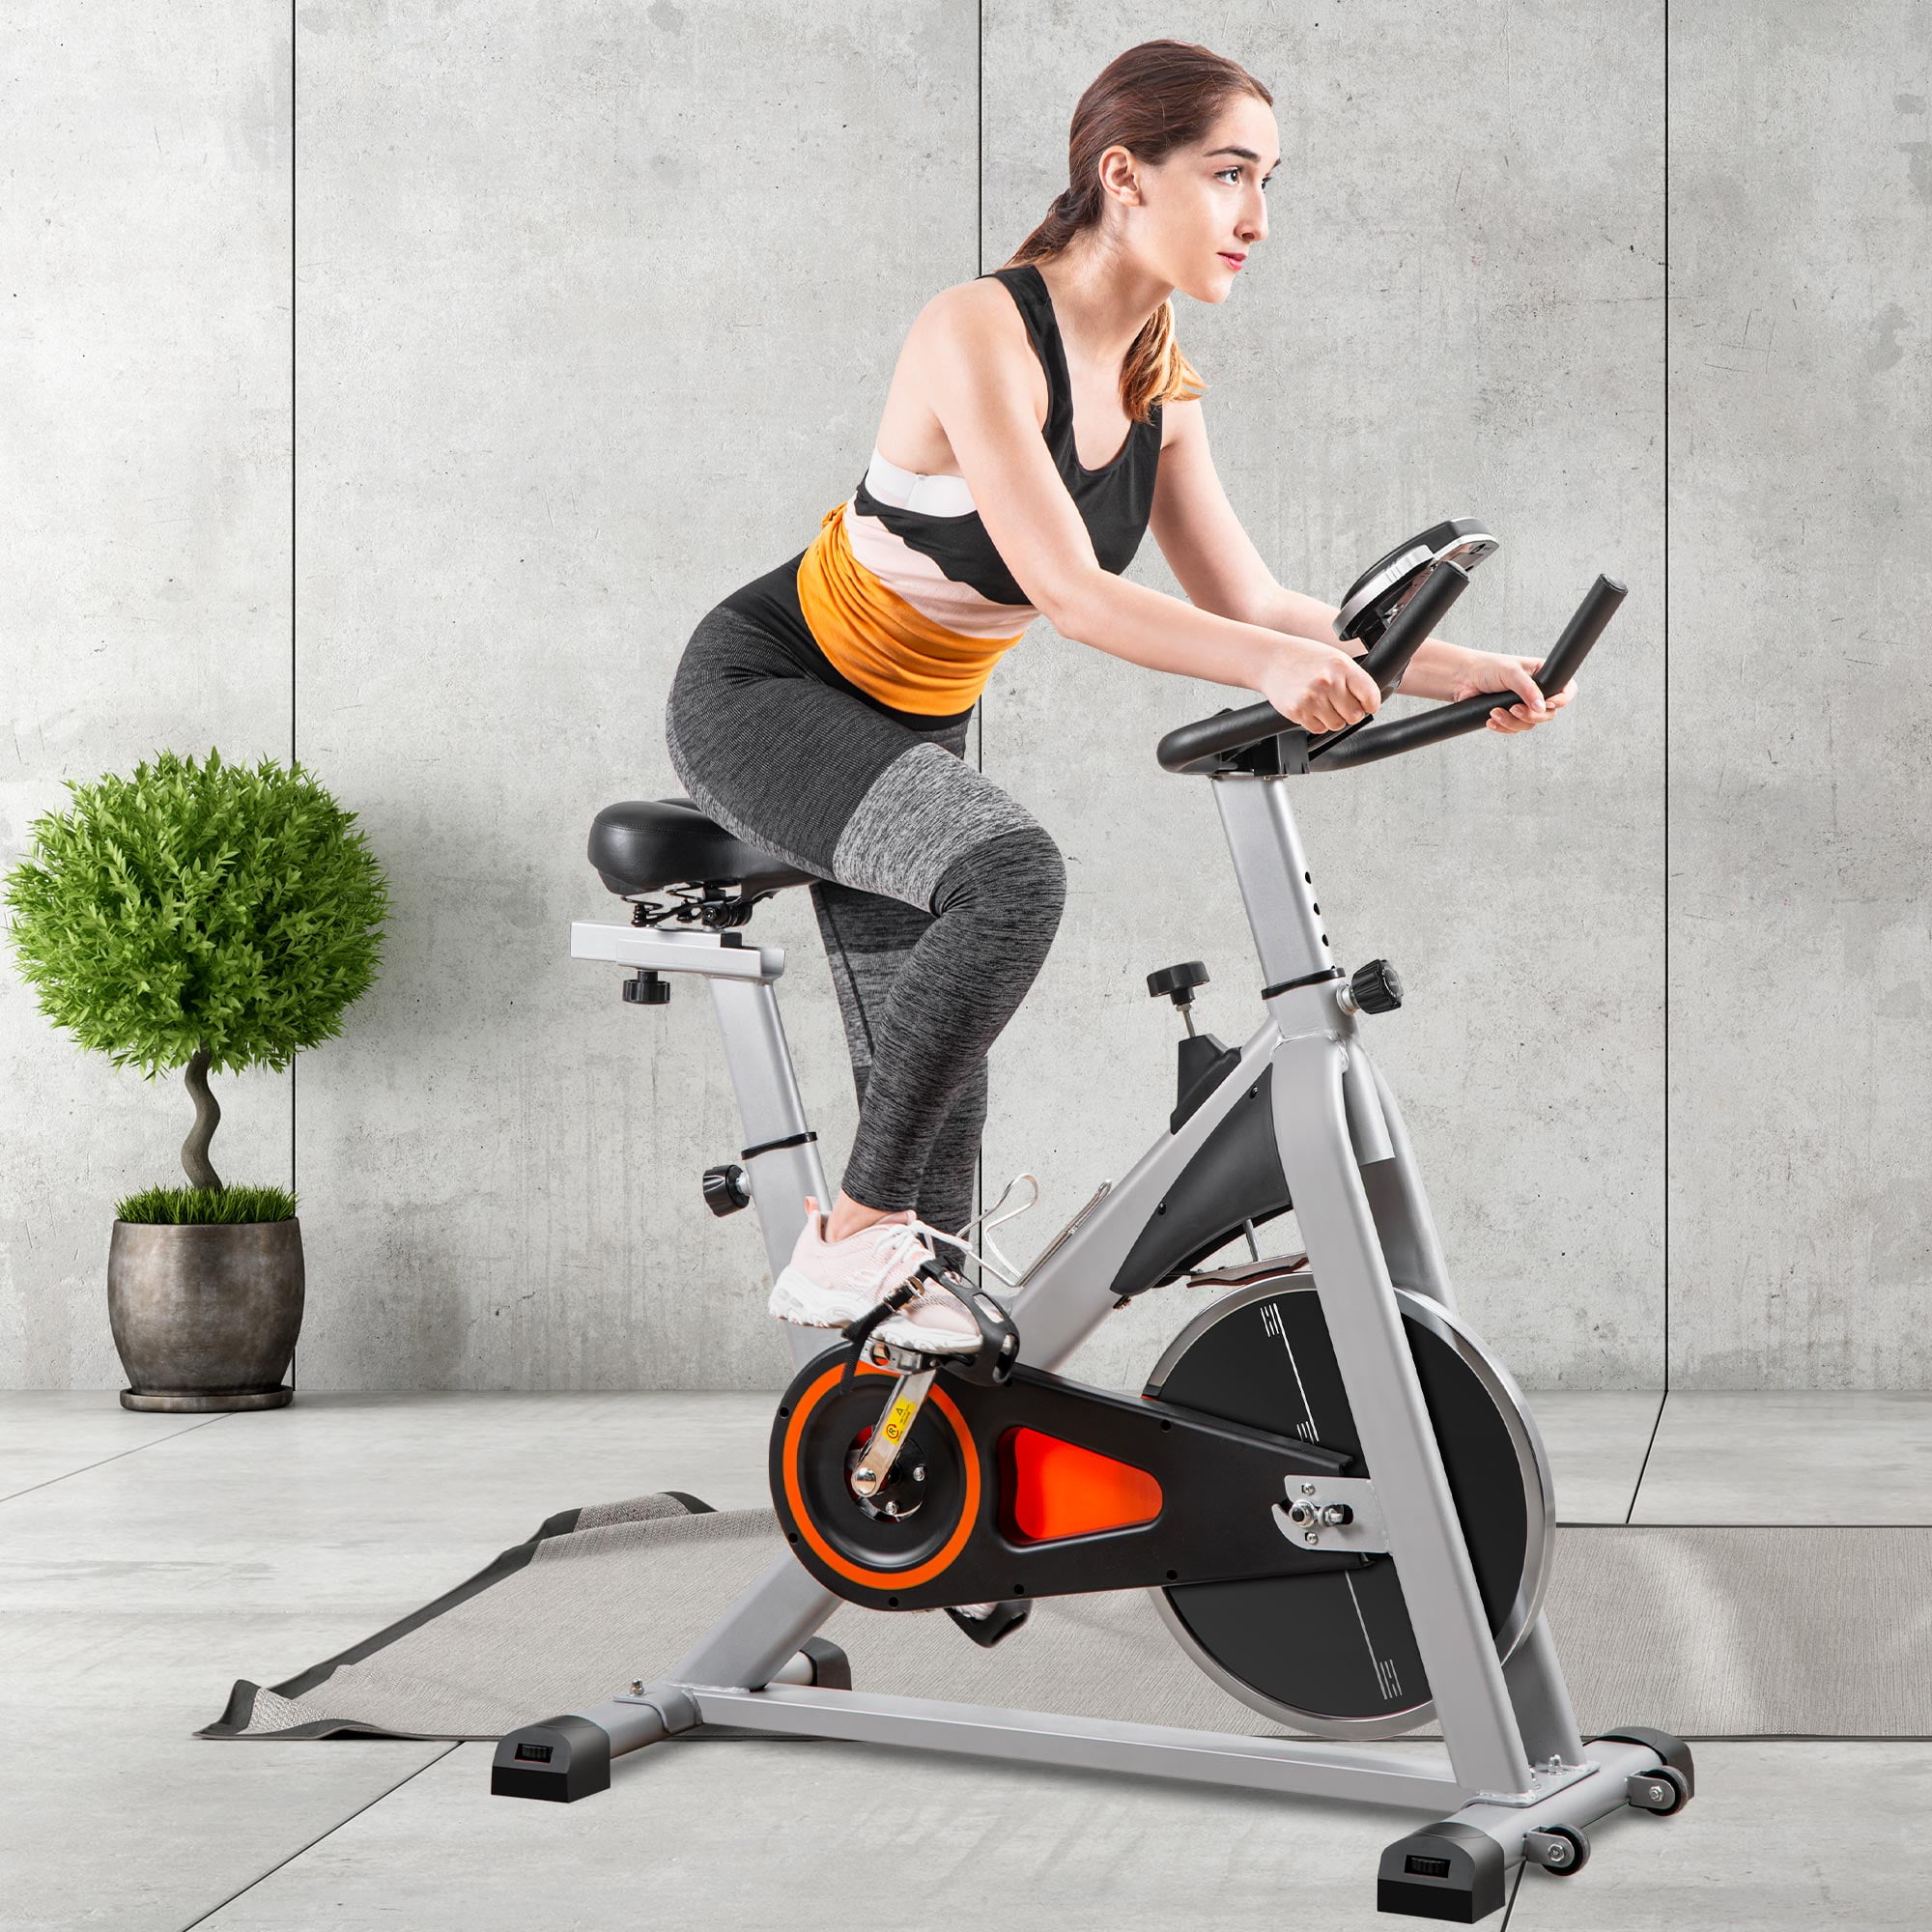 Details about   Bicycle Cycling Exercise Bike Stationary Fitness Cardio Home Workout Gym Indoor 